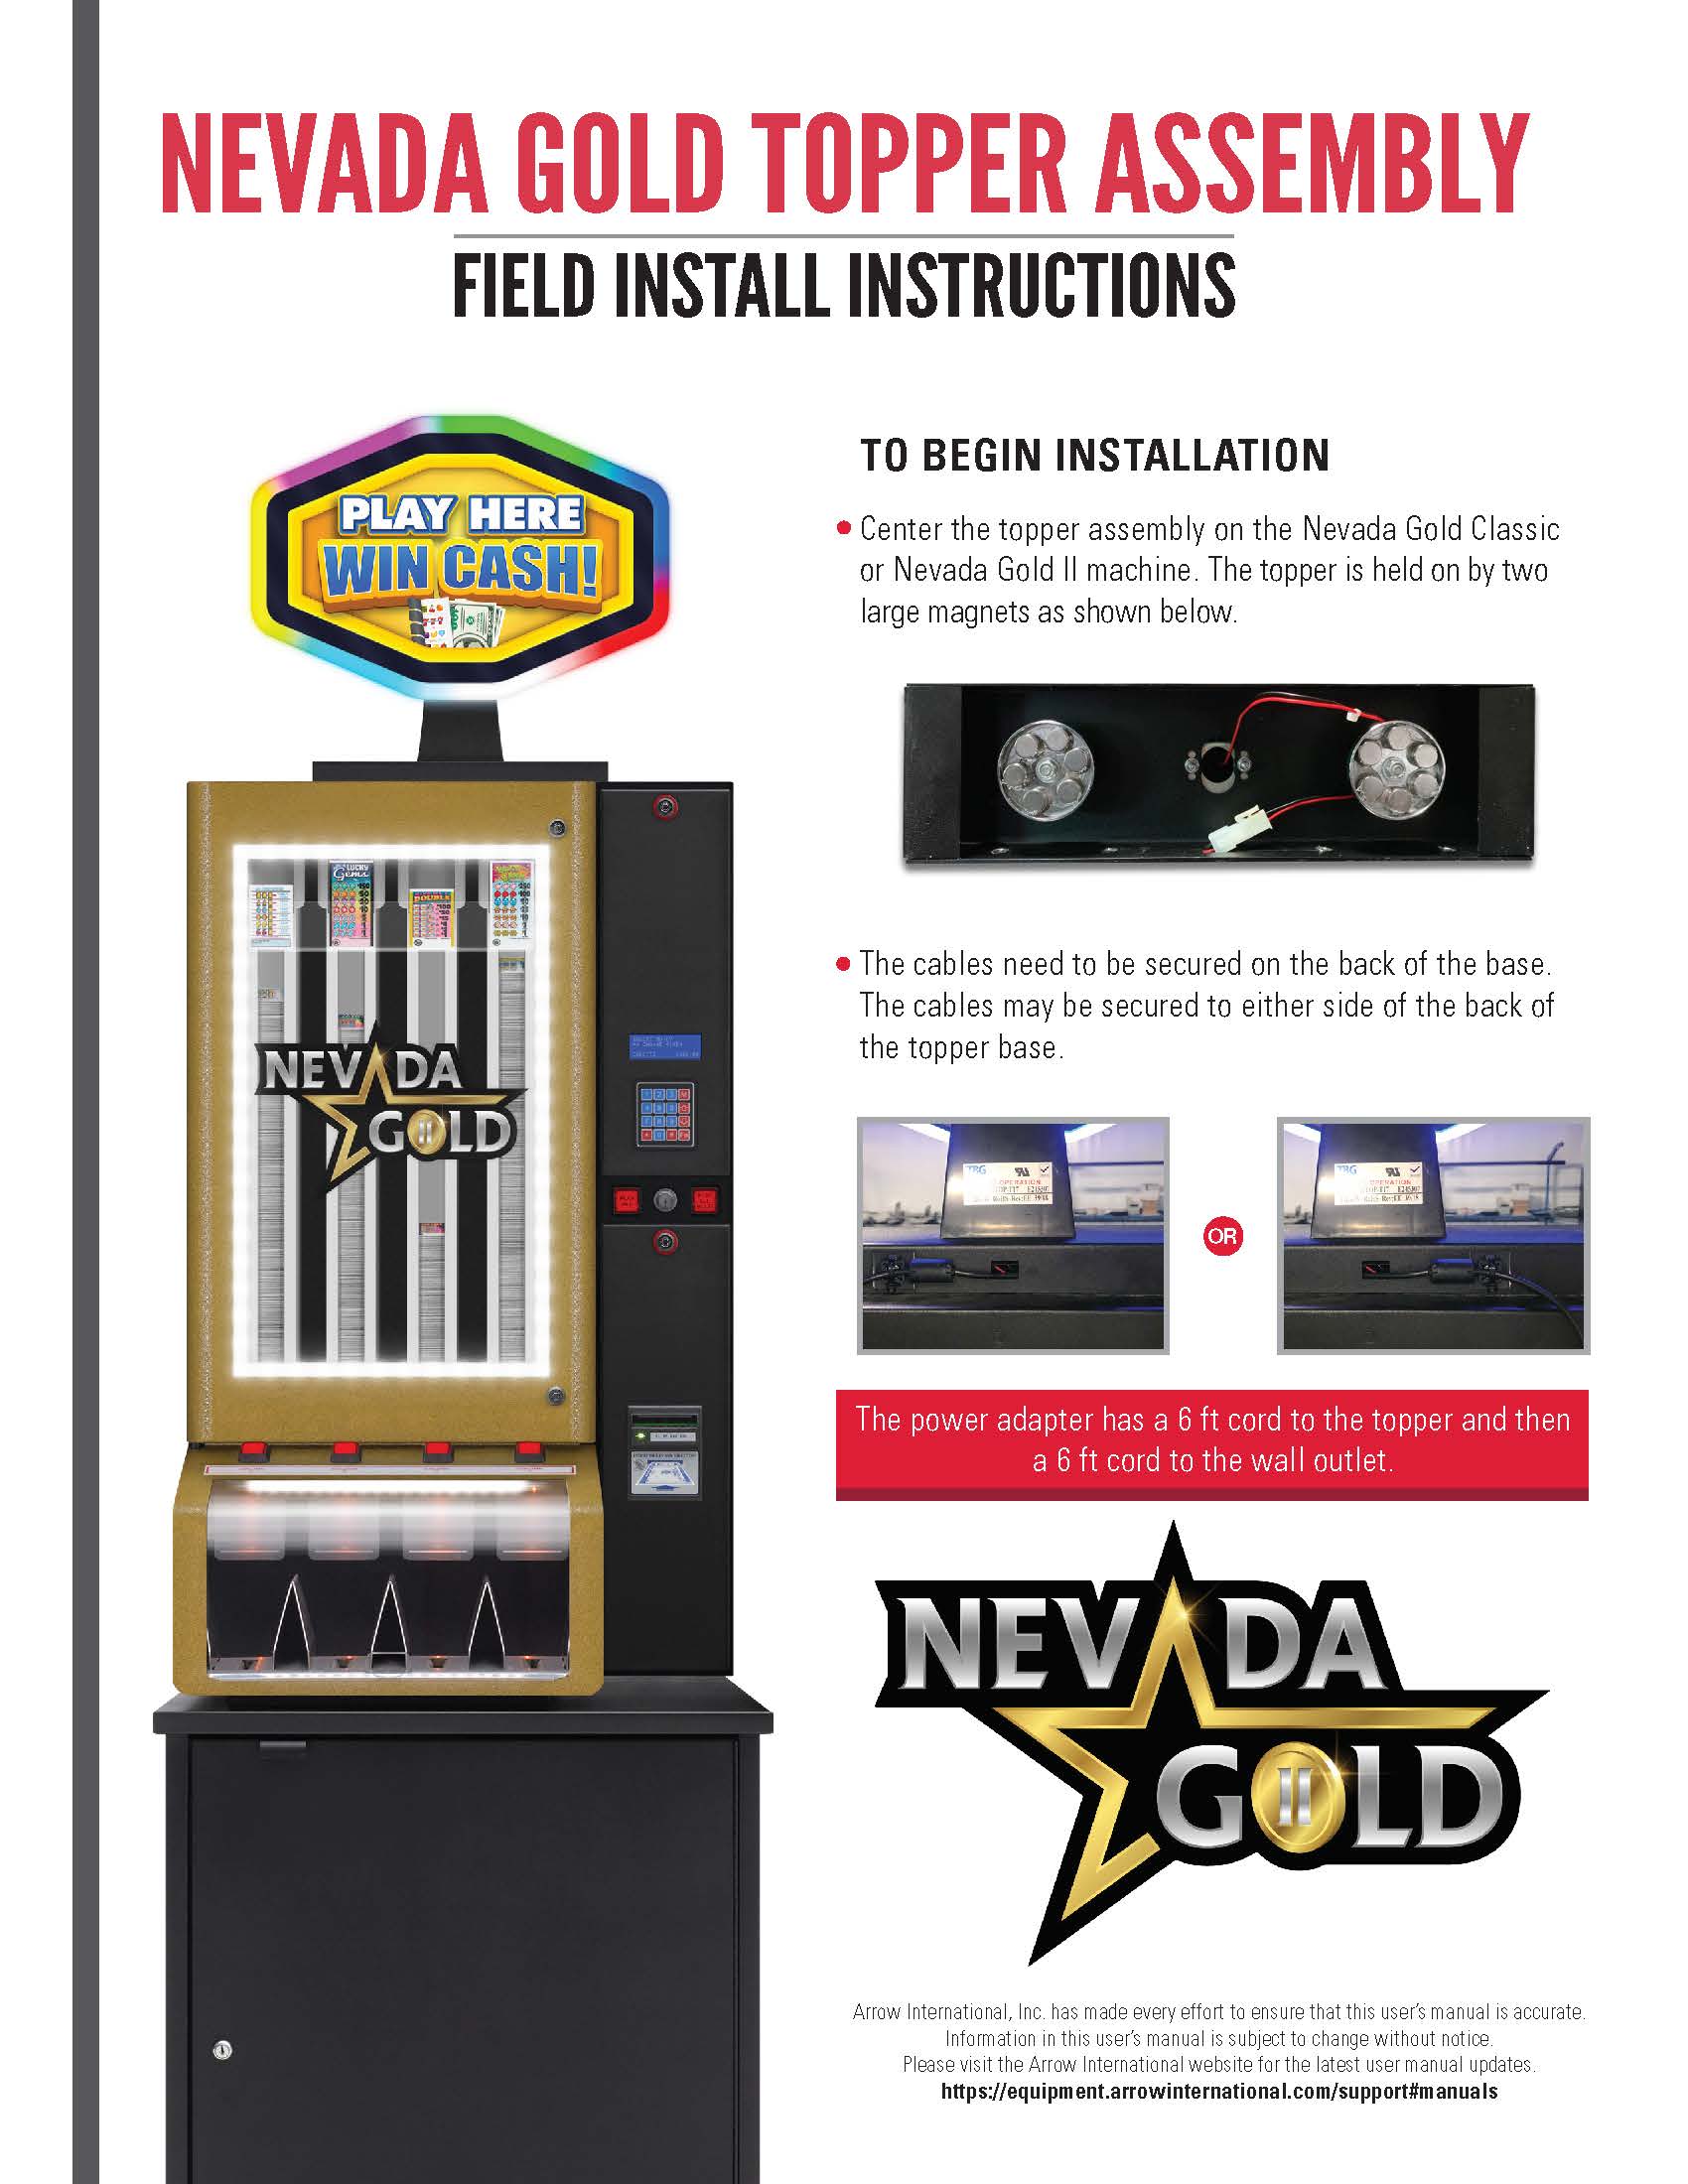 Nevada Gold Topper Assembly Promotional Materials/Equipment Flyers & Brochures